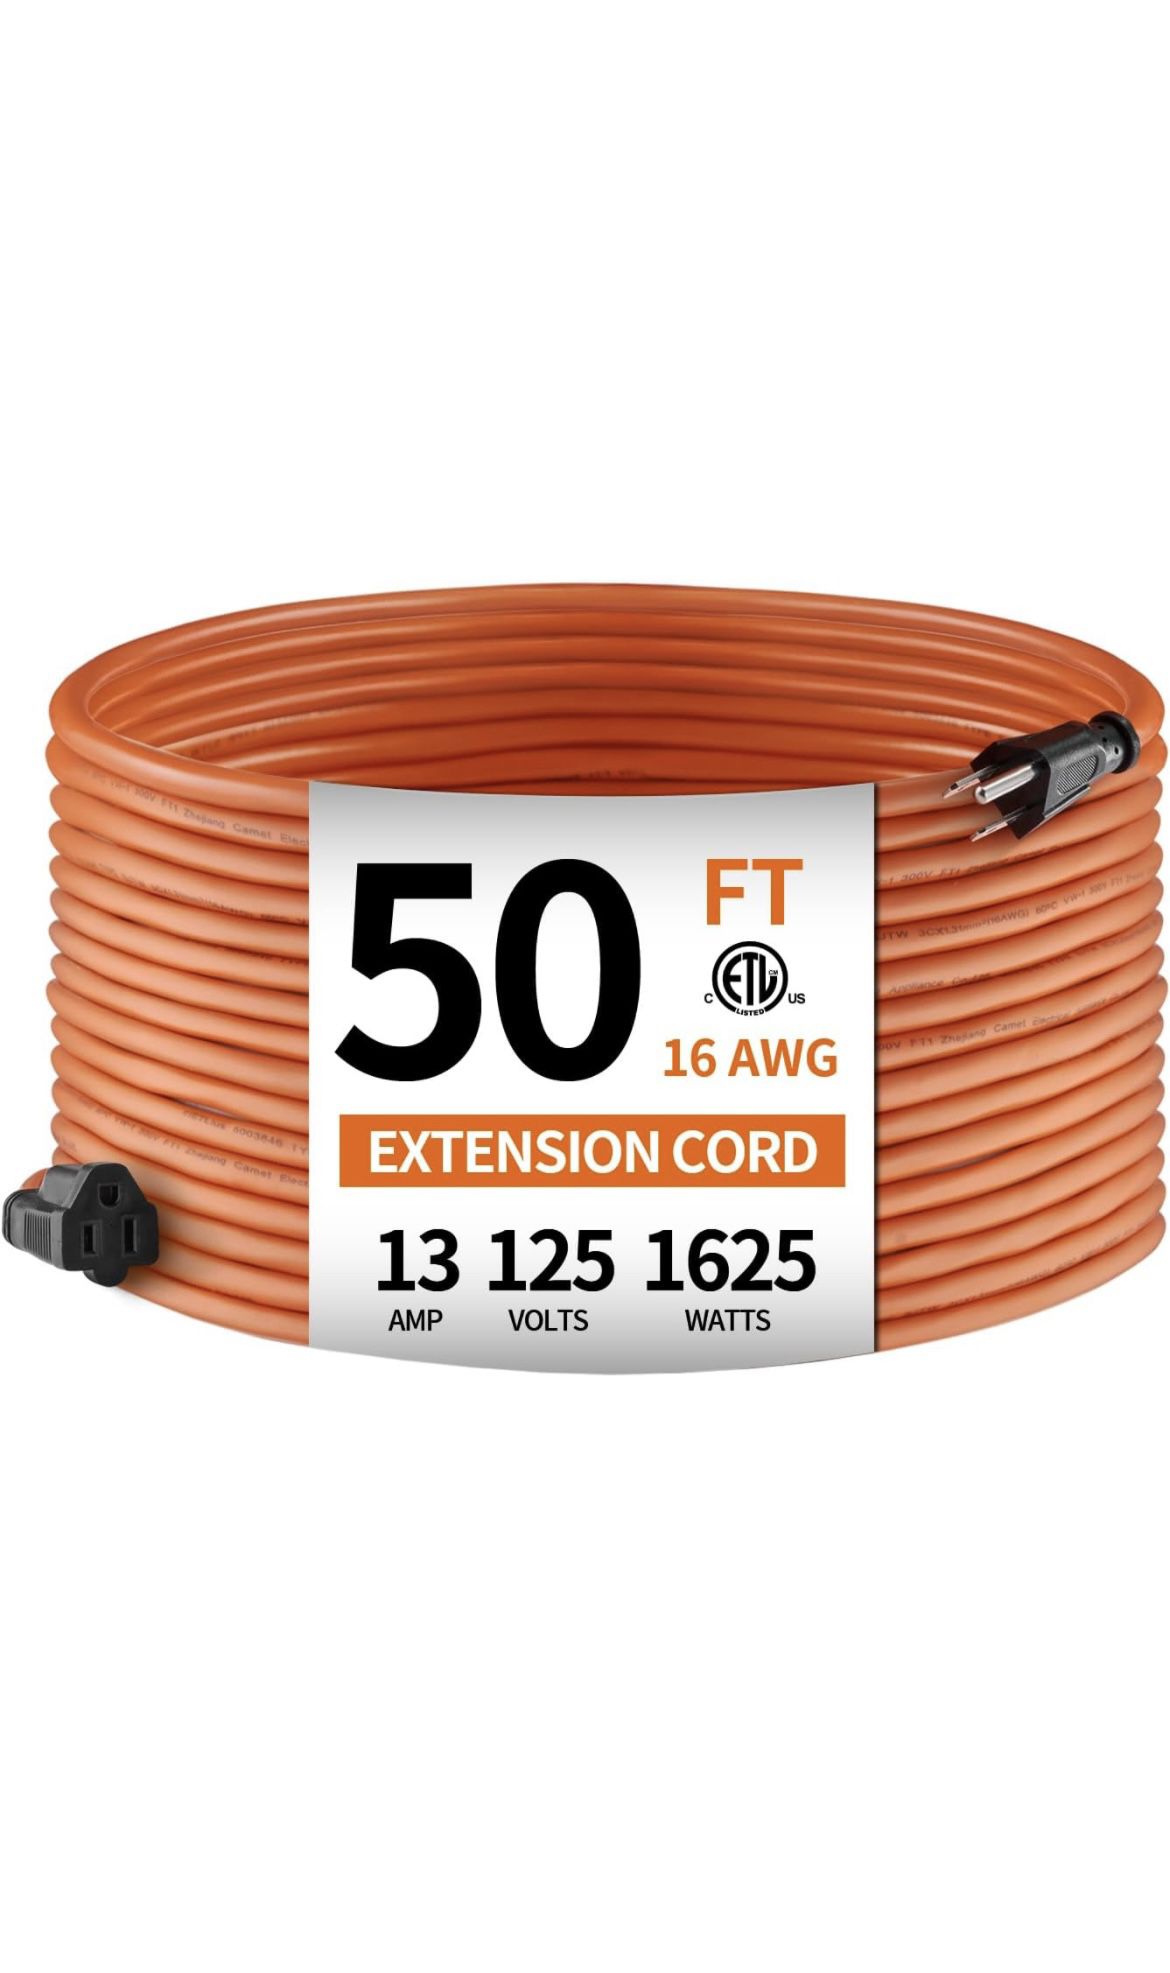 50ft 16AWG Outdoor Extension Cord, Indoor/Outdoor 50-Foot SJTW 16/3 Gauge Extension Cable with Durable Weatherproof PVC Vinyl Jacket, 3-Prong Grounded